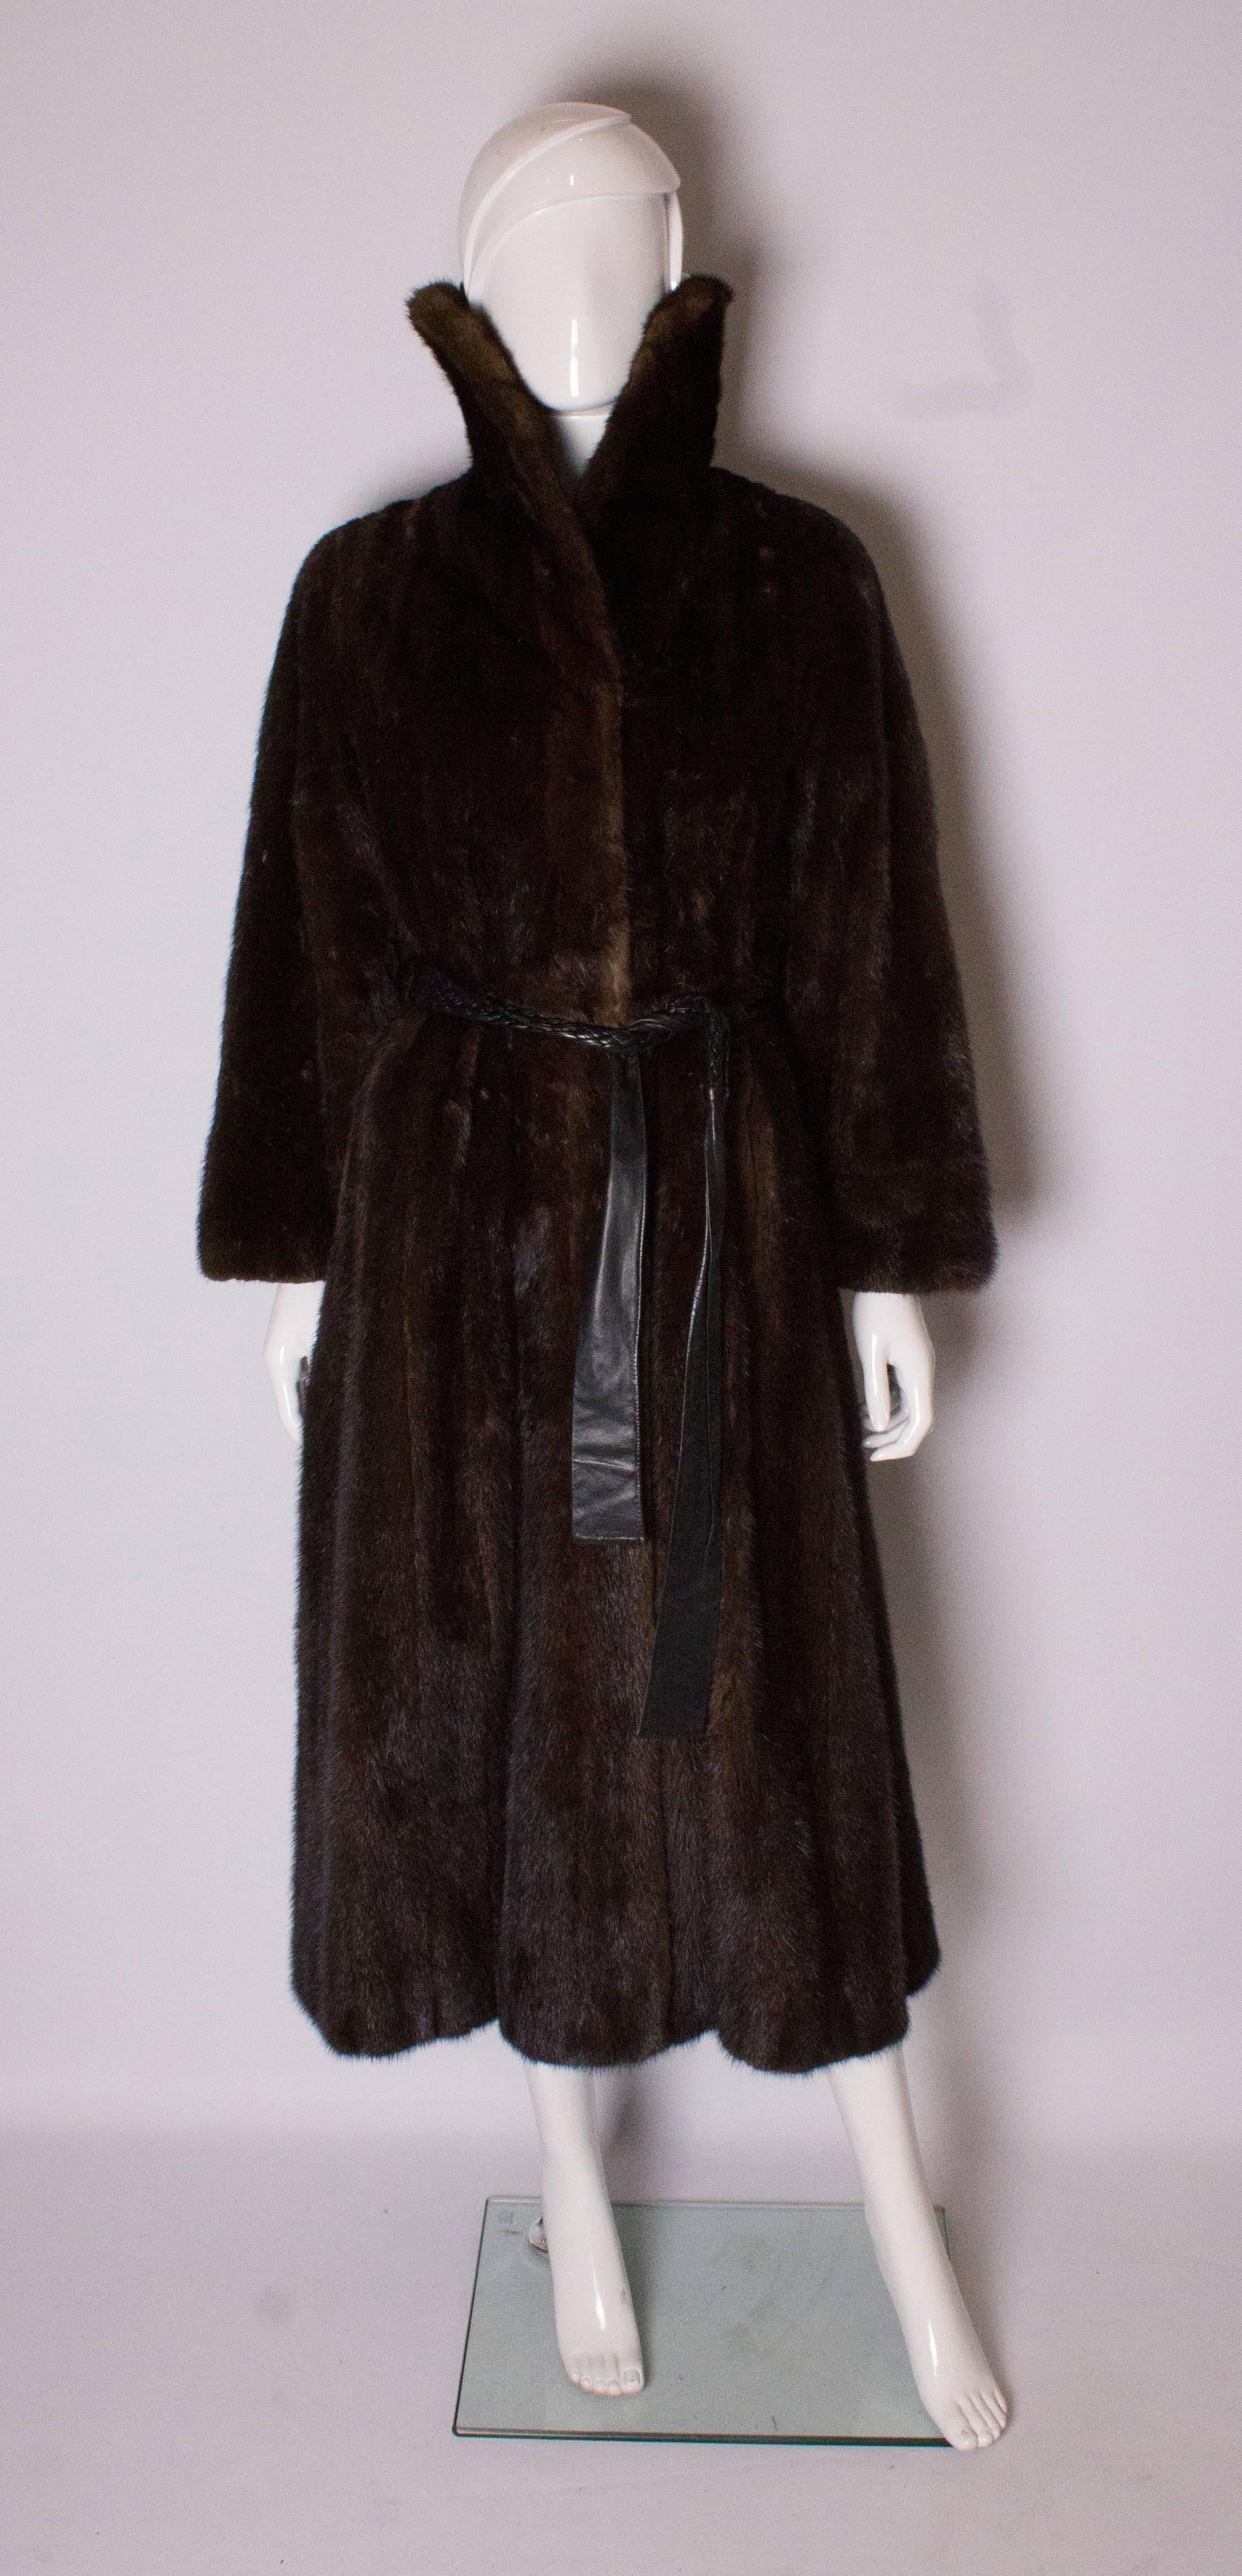 A glamorous mink coat with shawl collar and wrap over front. The coat has wide sleeves and a brown plaited leather belt ( coat has belt holes) that gives it definition.